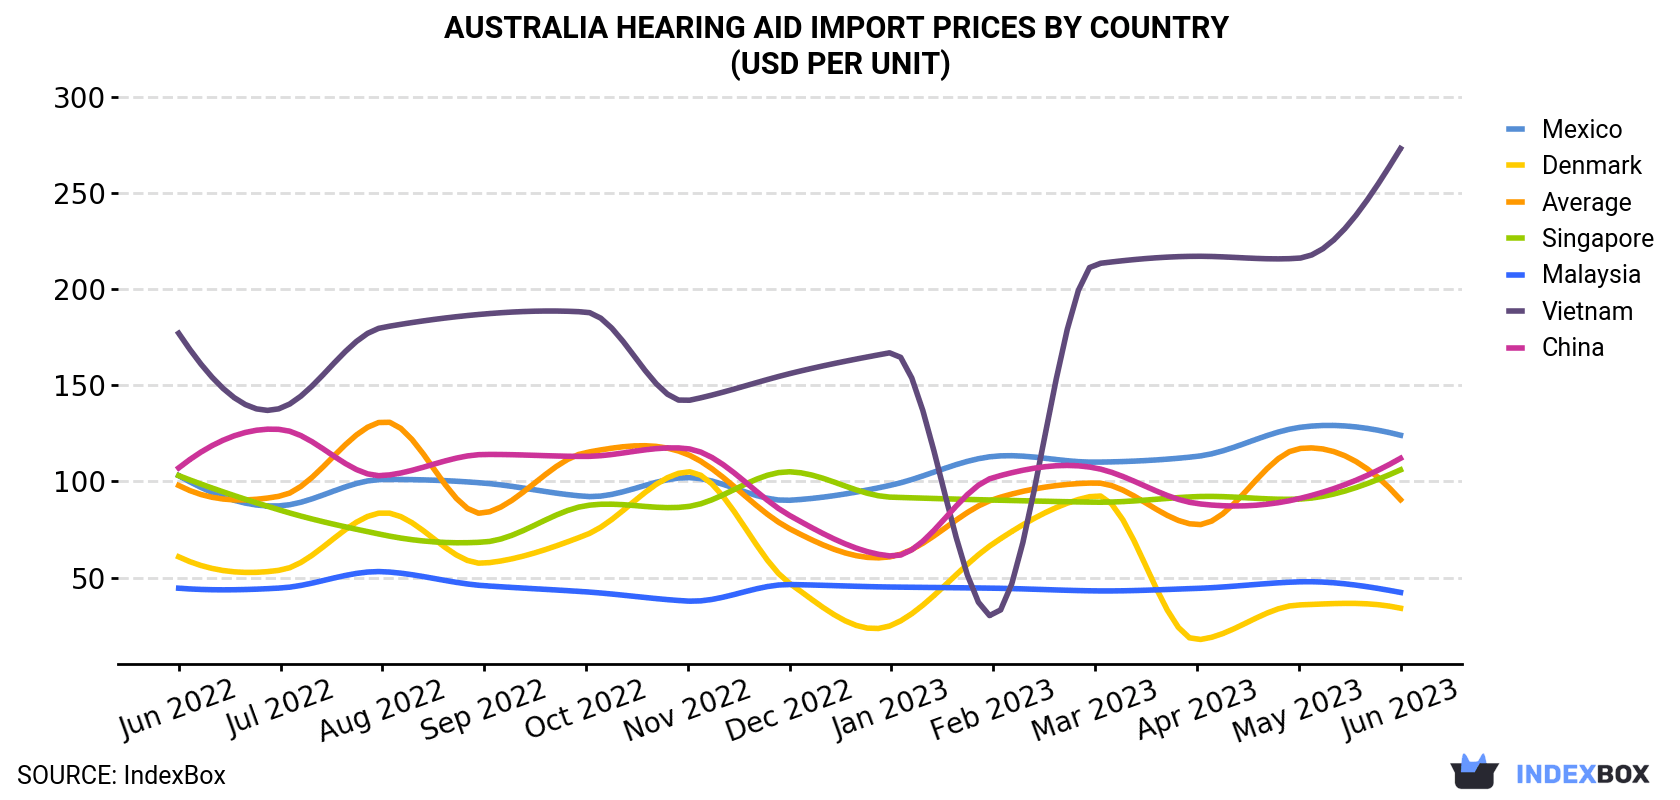 Australia Hearing Aid Import Prices By Country (USD Per Unit)